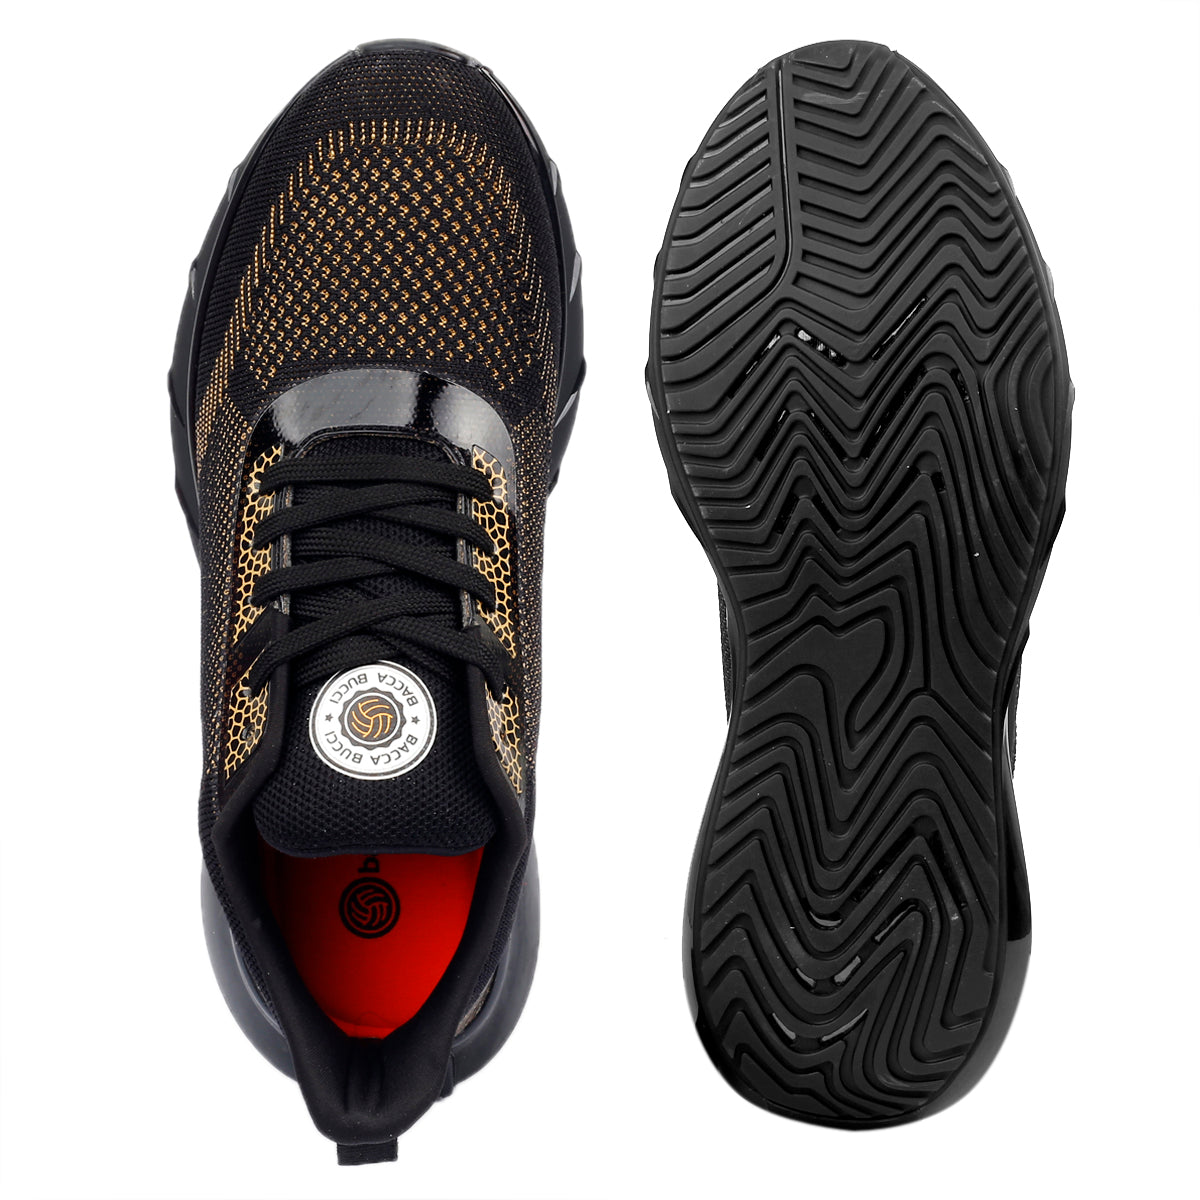 Bacca Bucci ROADRUNNER Running Shoes for Tuff Surface Run with Natural Rubber & EVA out-sole - Bacca Bucci